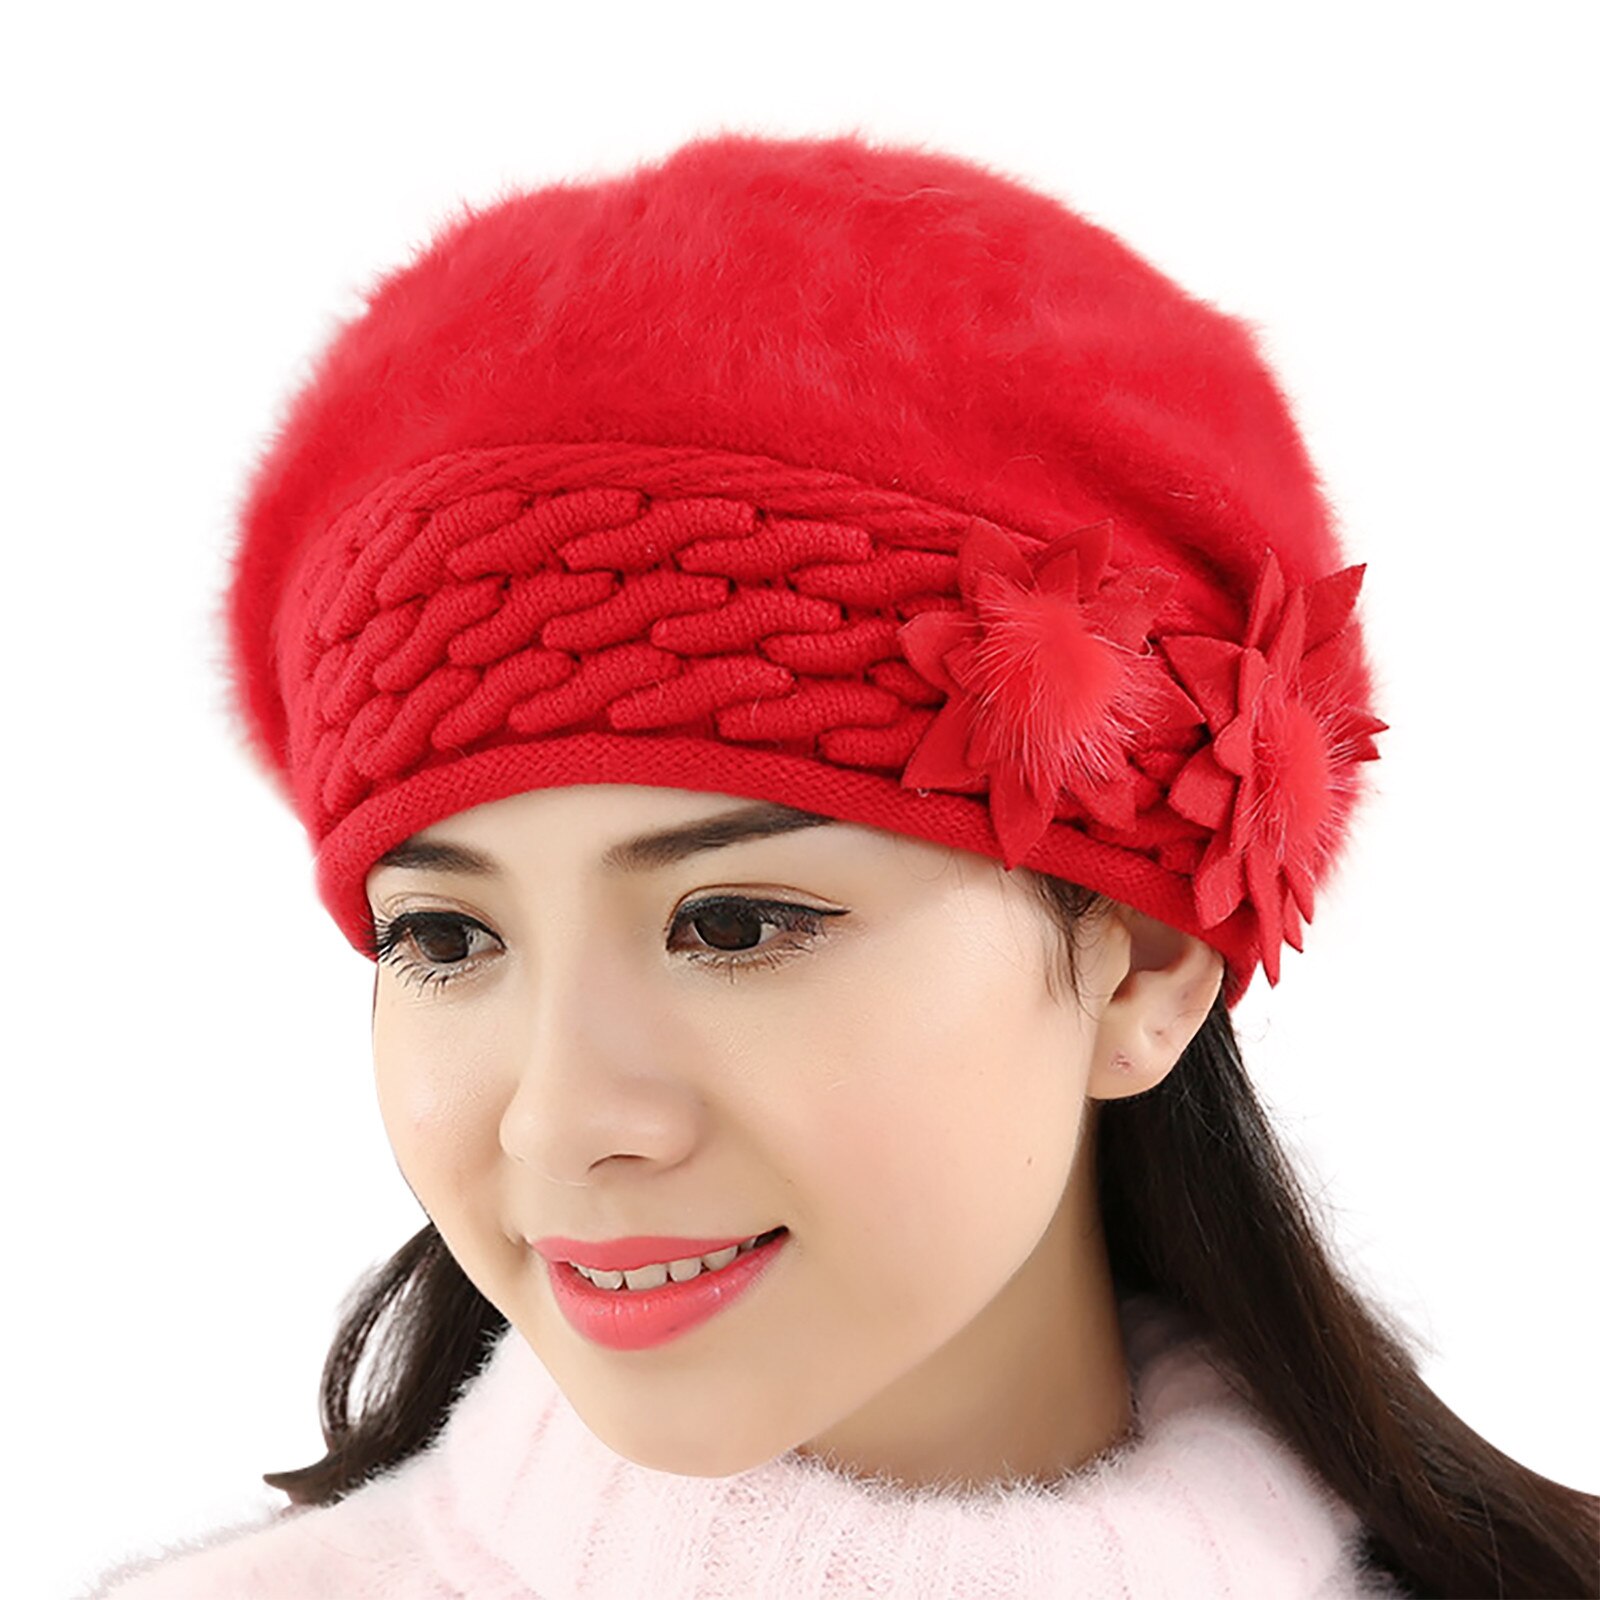 Beret Women Winter Hat Beanie Warm Knit Flower Double Layers Soft Thick Thermal Snow Skiing Outdoor Hats For Female Caps: Red 